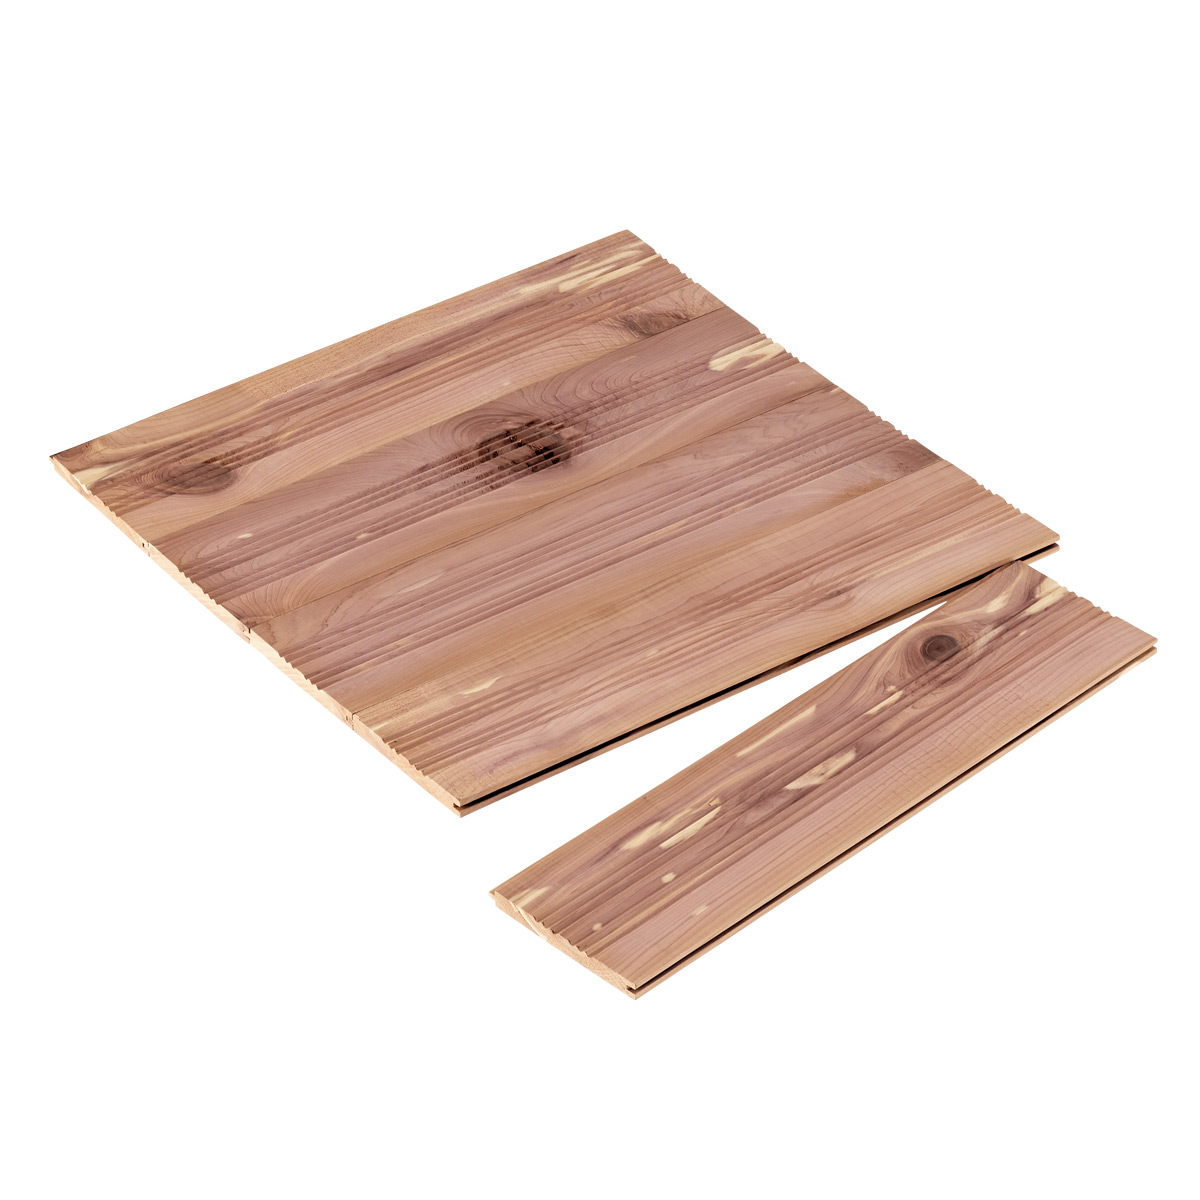 https://www.containerstore.com/catalogimages/425584/10074202_Cedar_Drawer_Liners_V2.jpg